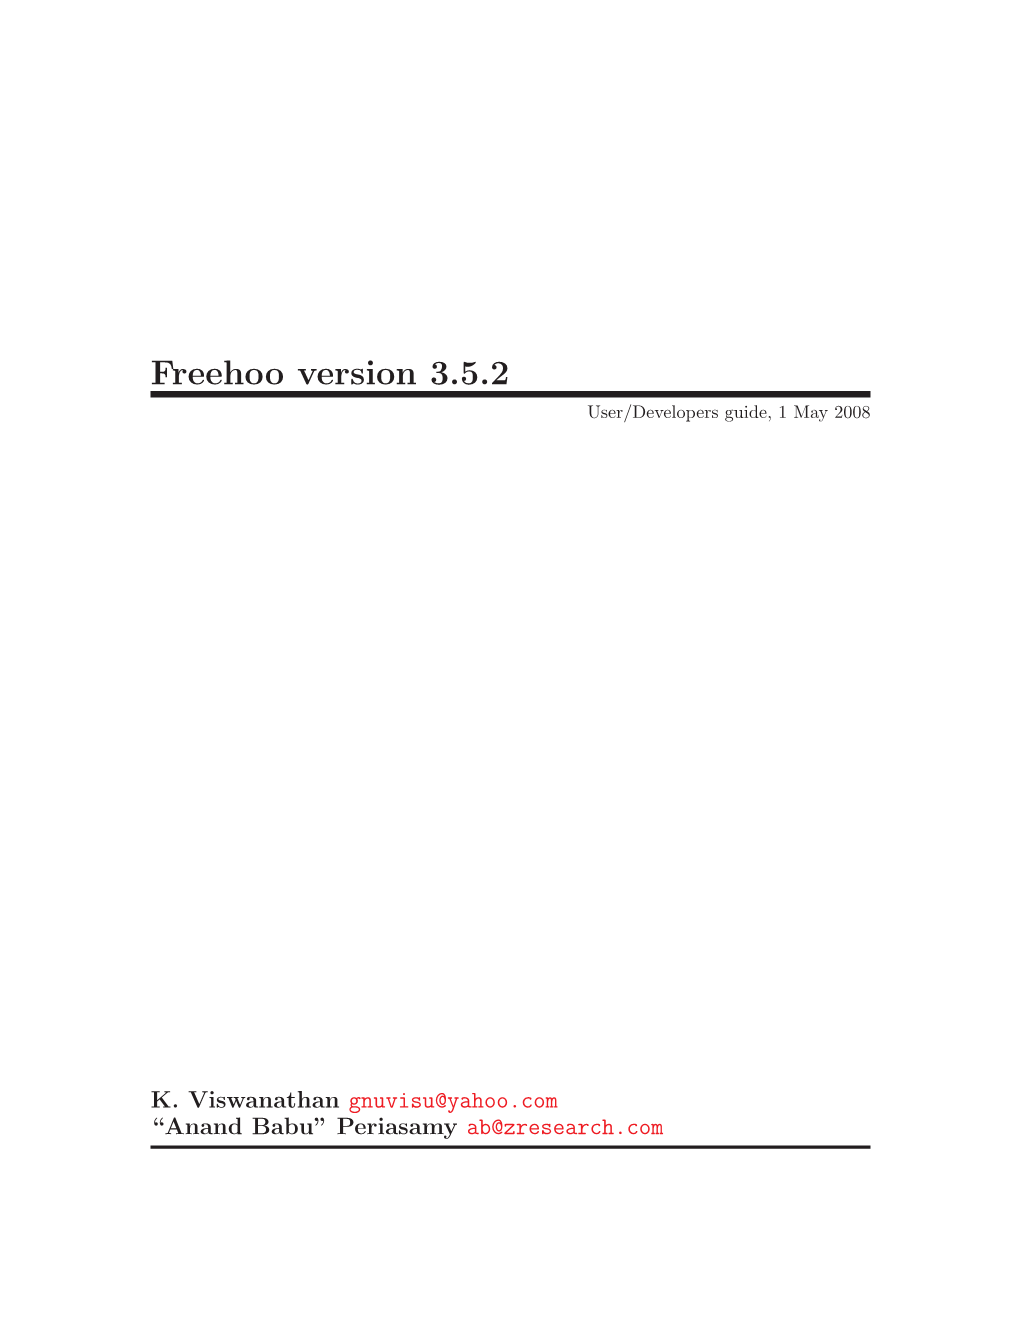 Freehoo Version 3.5.2 User/Developers Guide, 1 May 2008